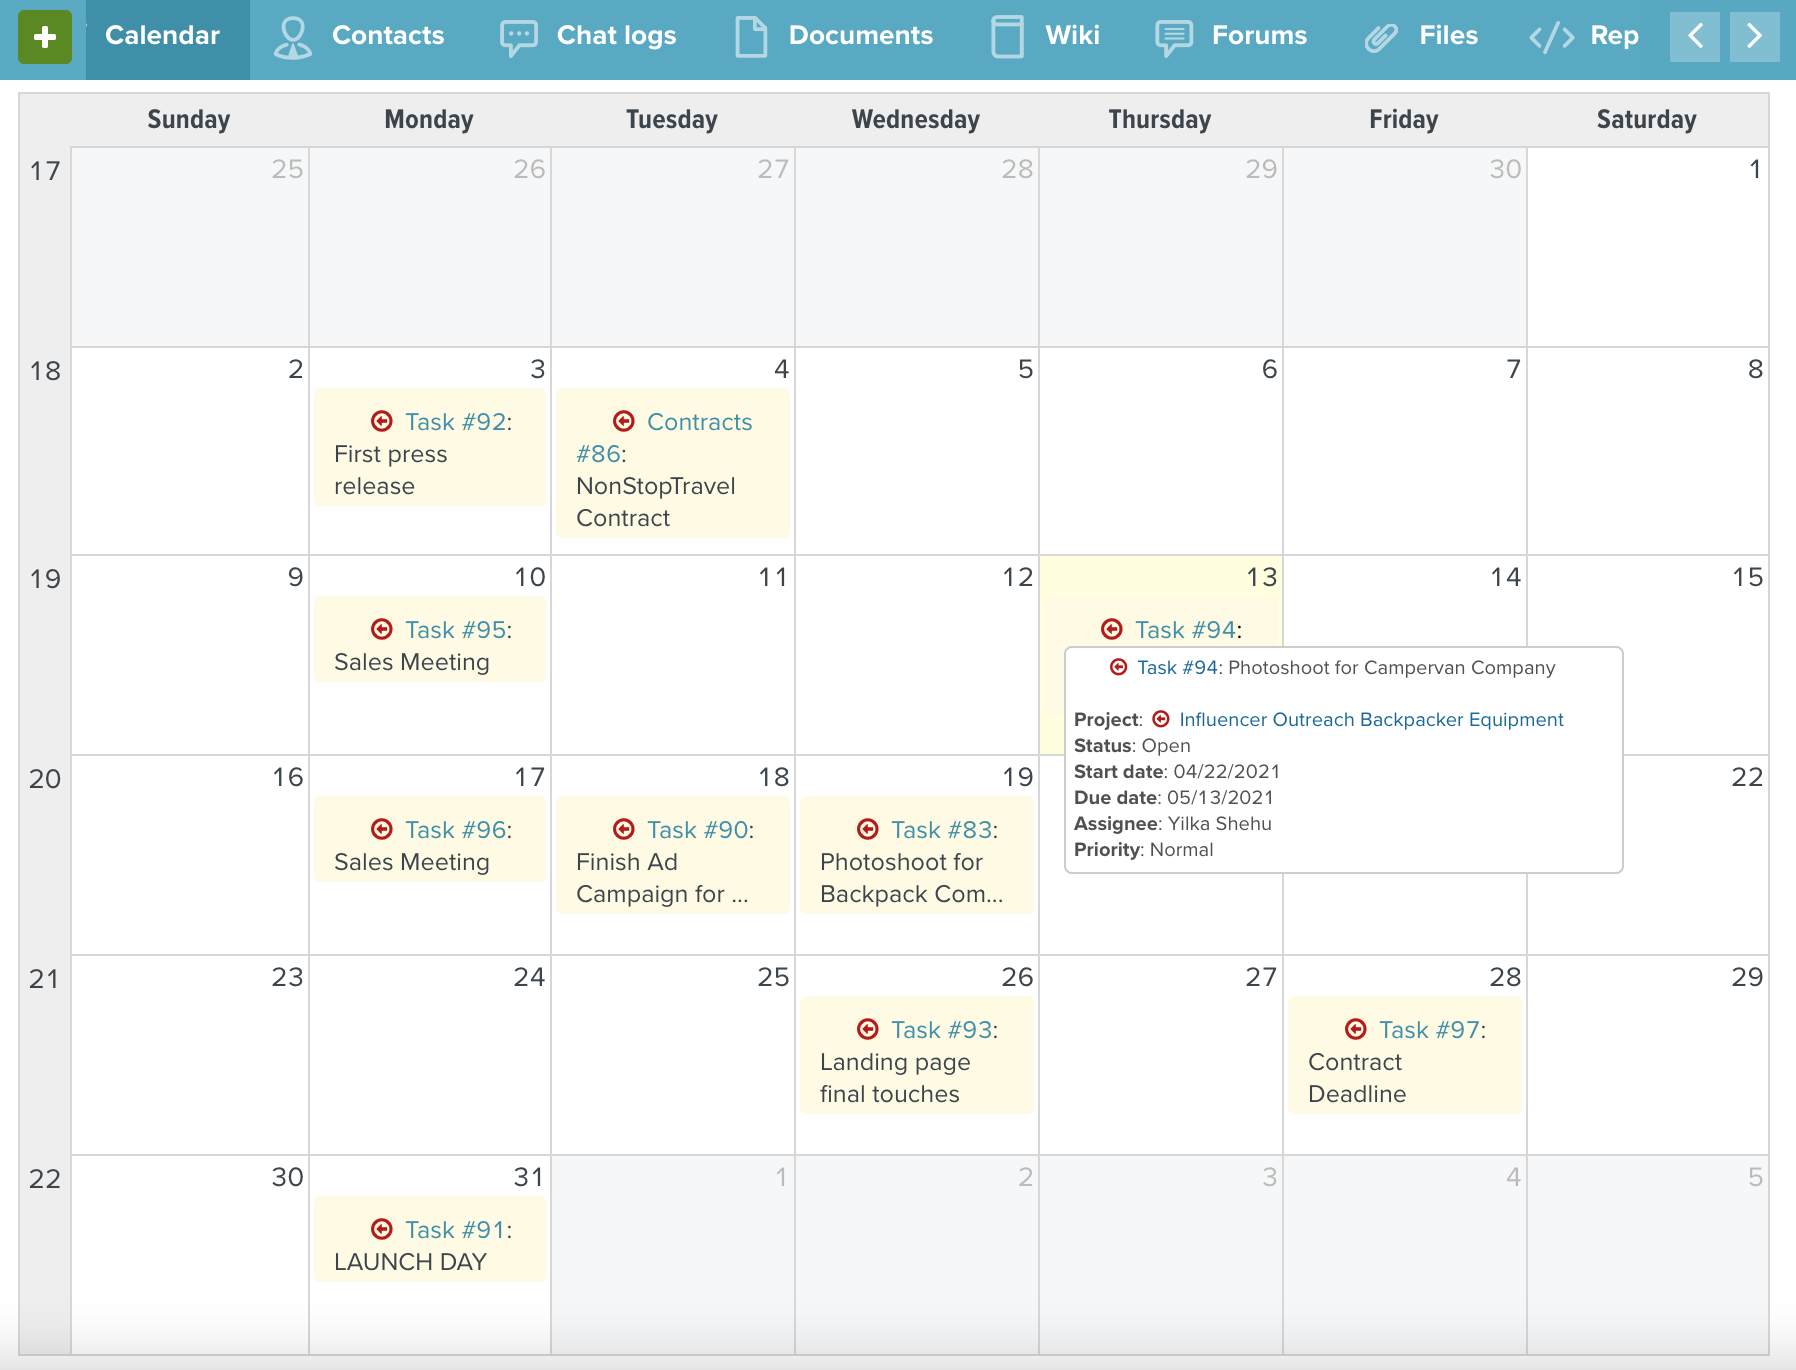 Calendar View for a launch campaign